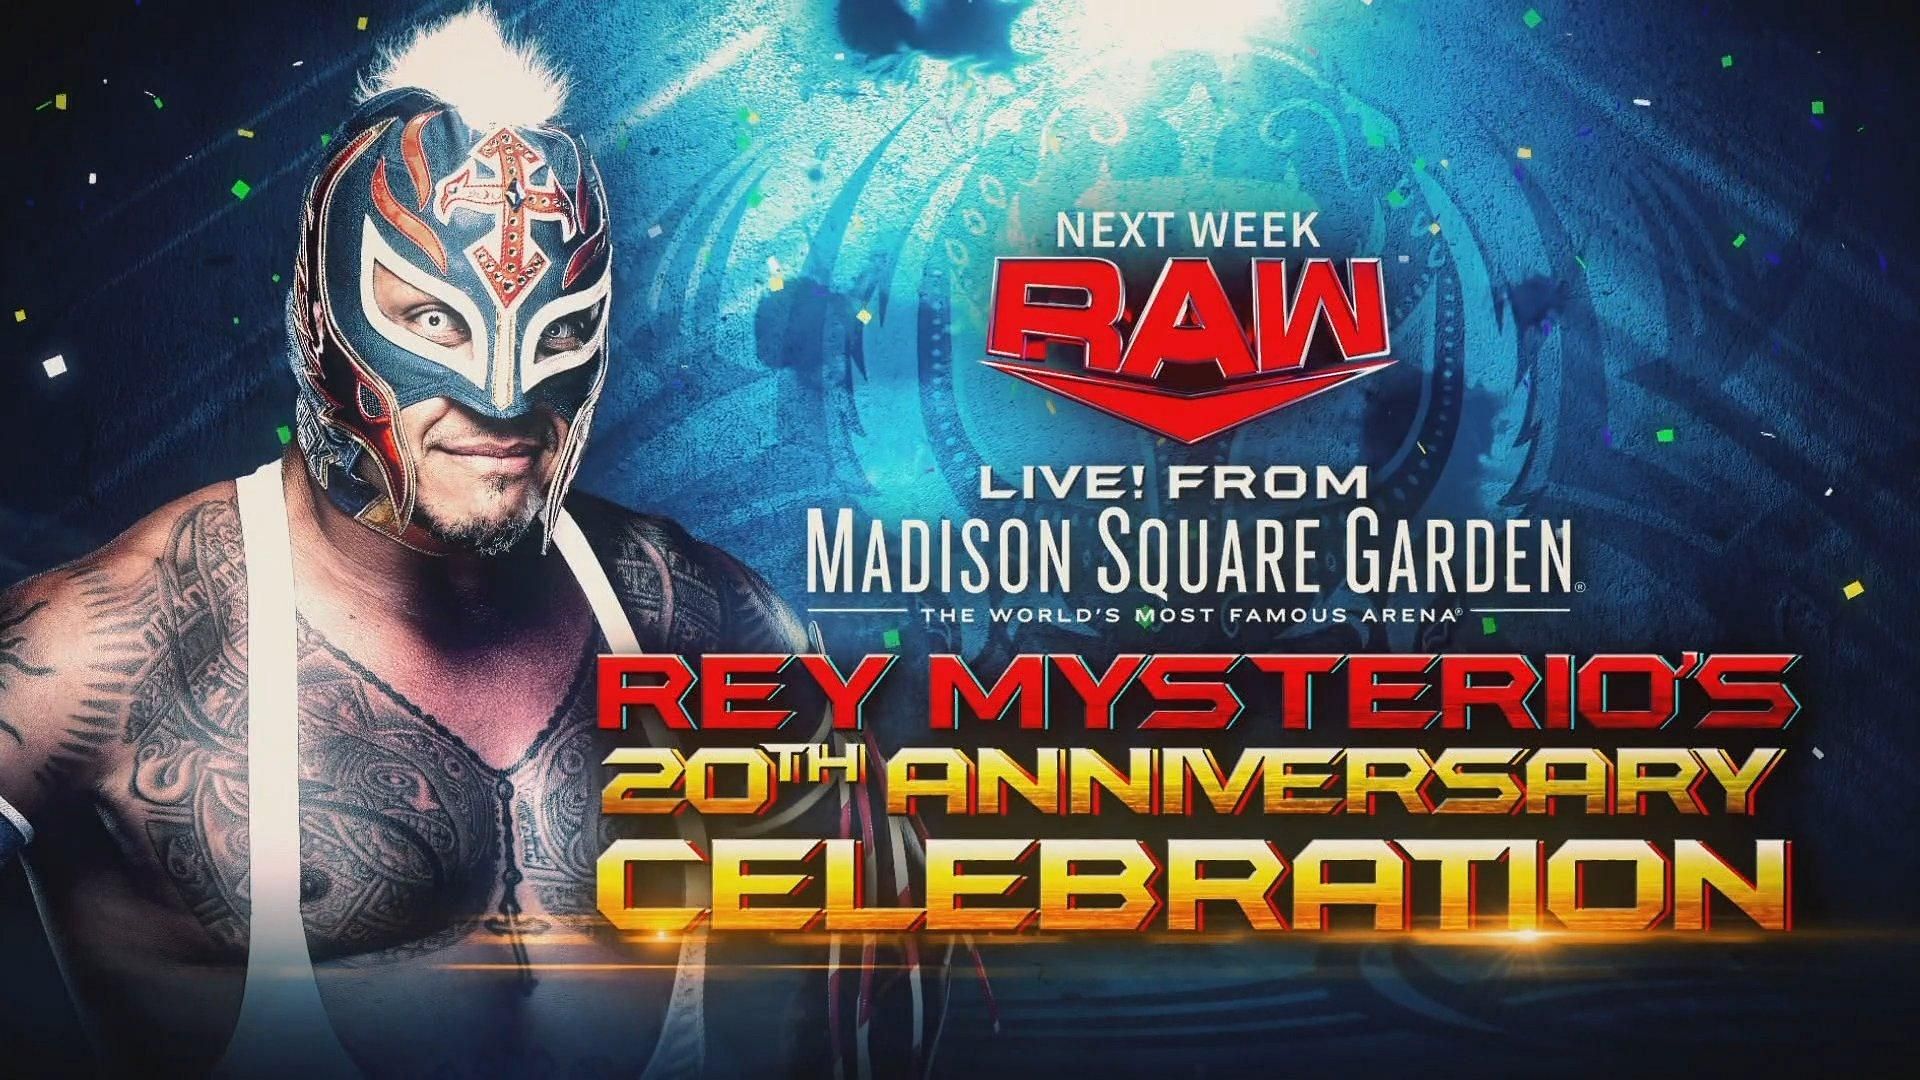 Rey Mysterio will celebrate 20 years of excellence on Monday